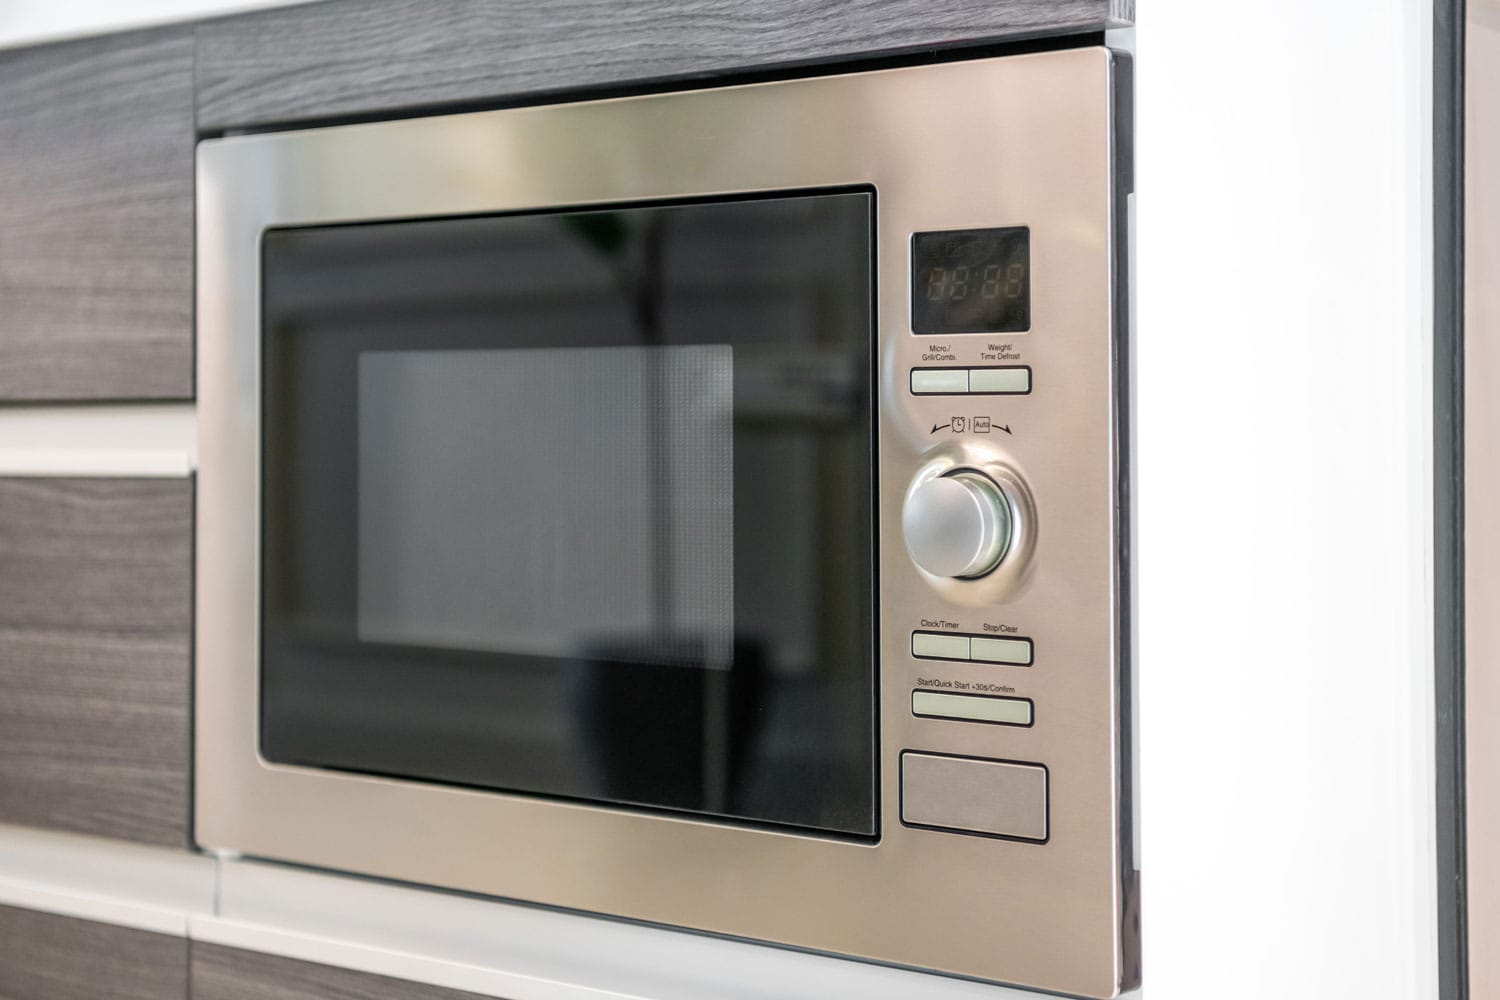 A stainless microwave in the kitchen